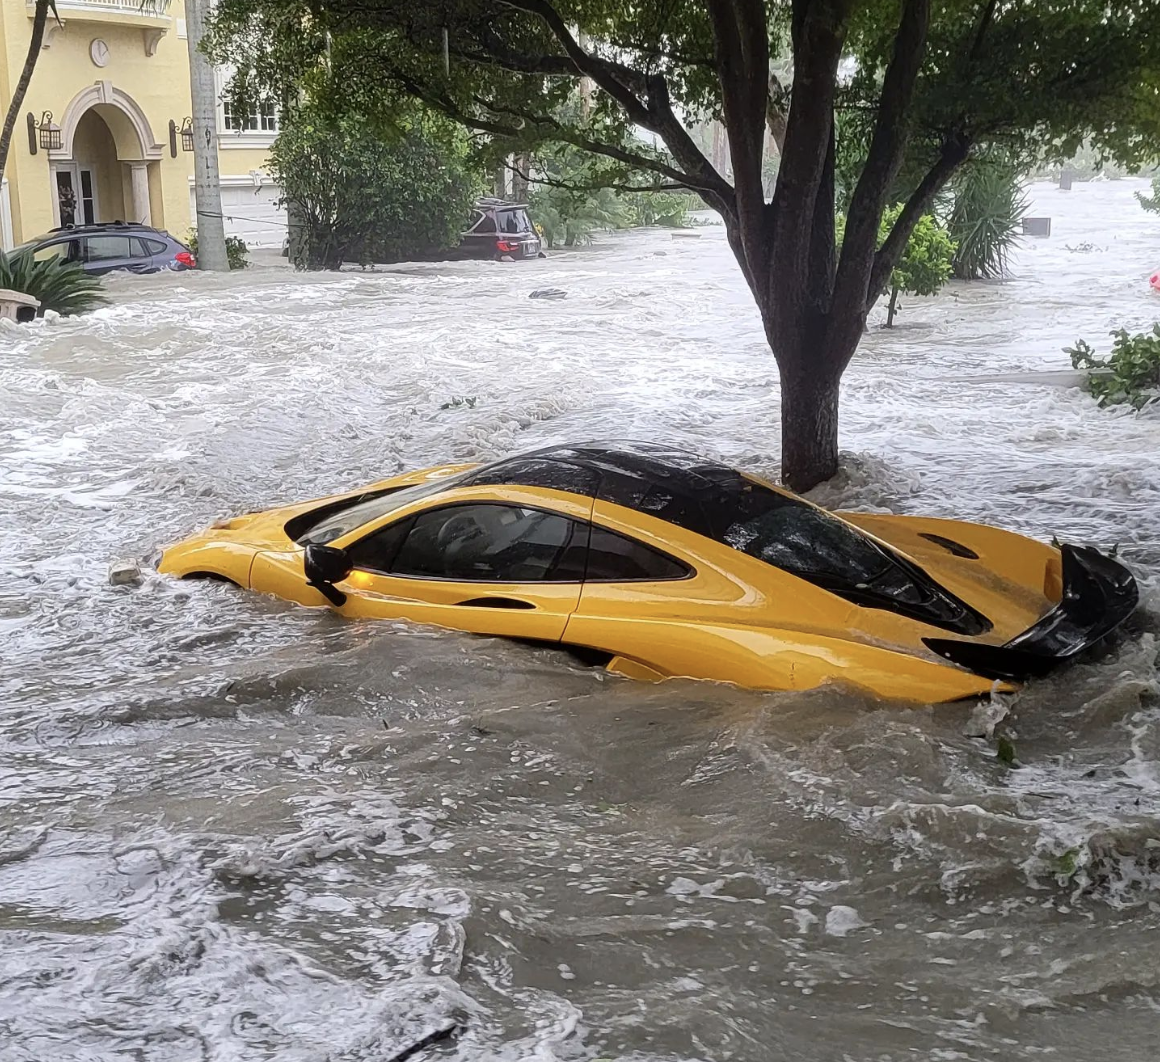 The McLaren P1 submerged by flood waters.